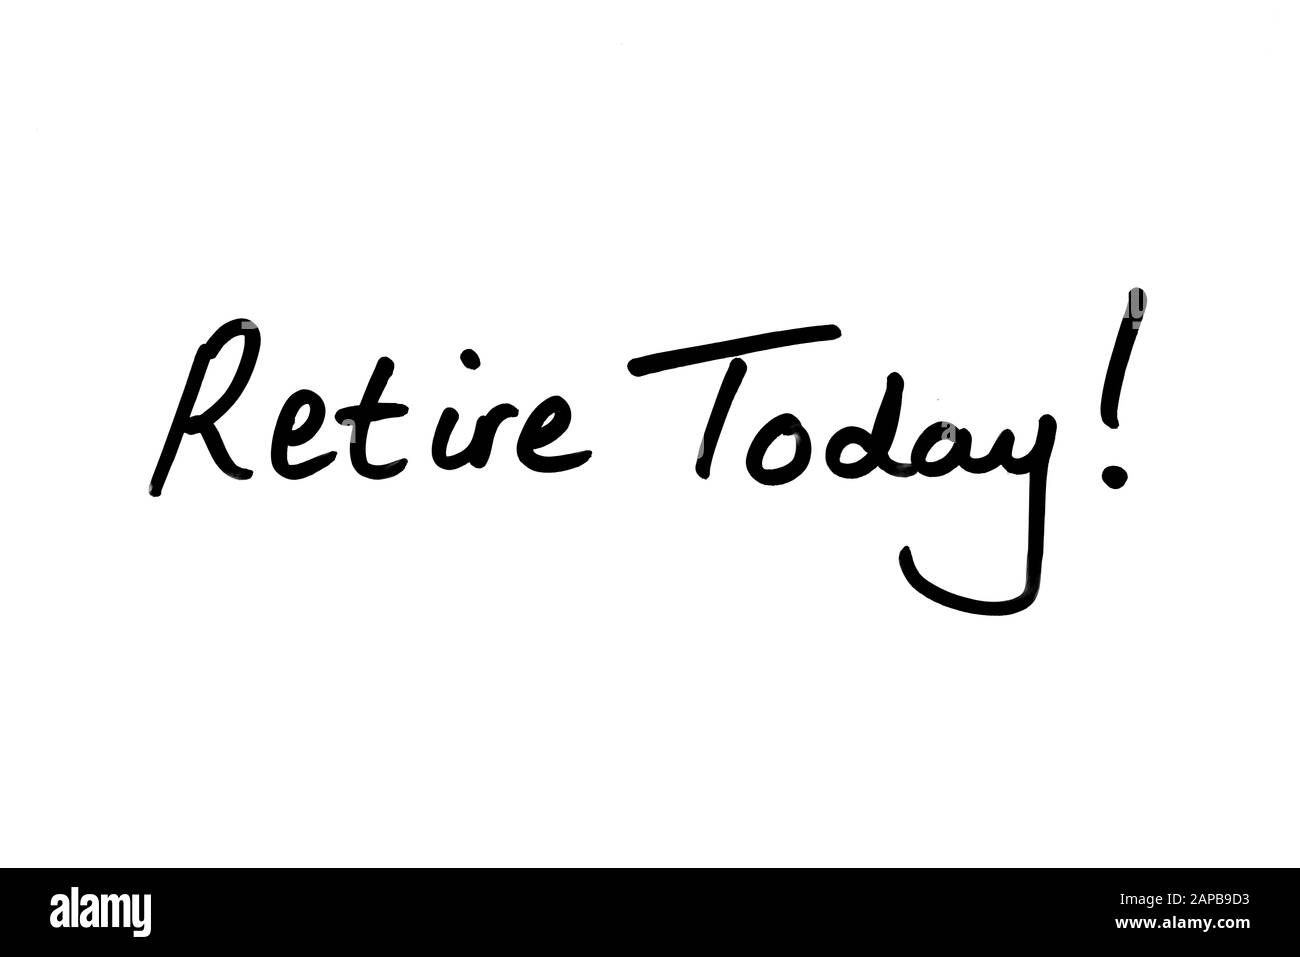 Retire Today! handwritten on a white background. Stock Photo